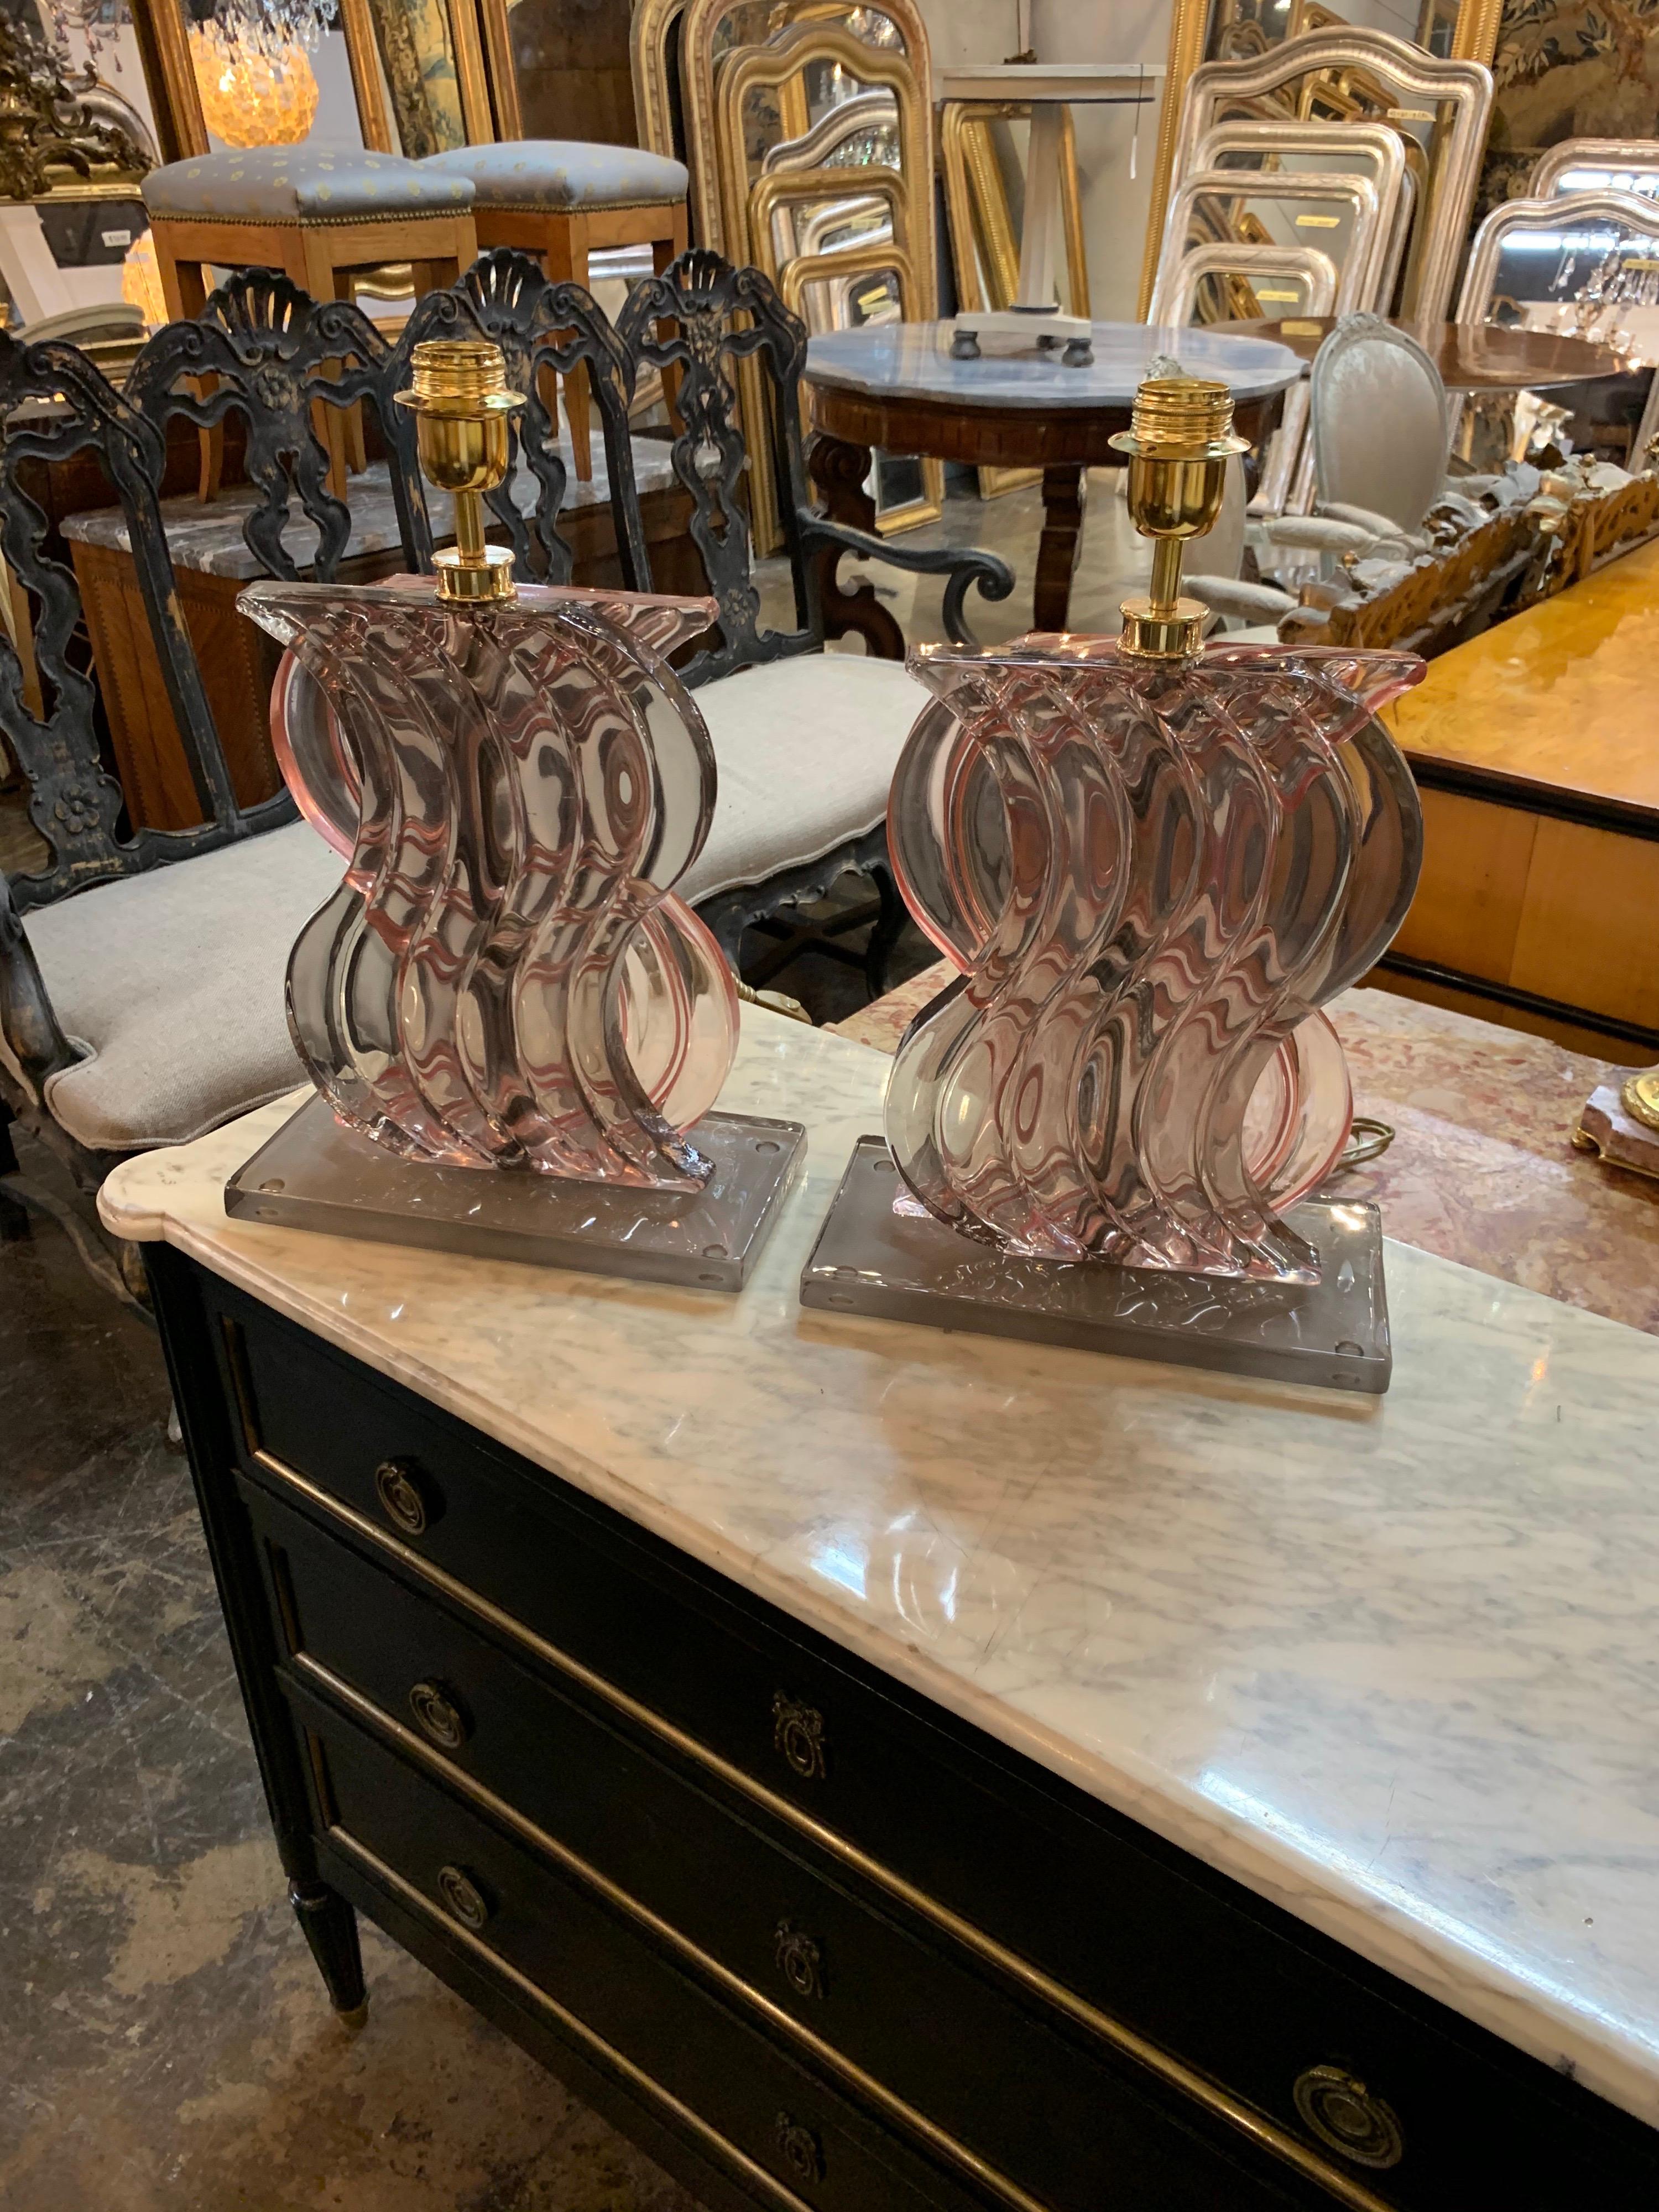 Fabulous pair of modern 2 sided pink and black Murano glass lamps. Beautiful decorative wavy pattern on a glass base. Very special!